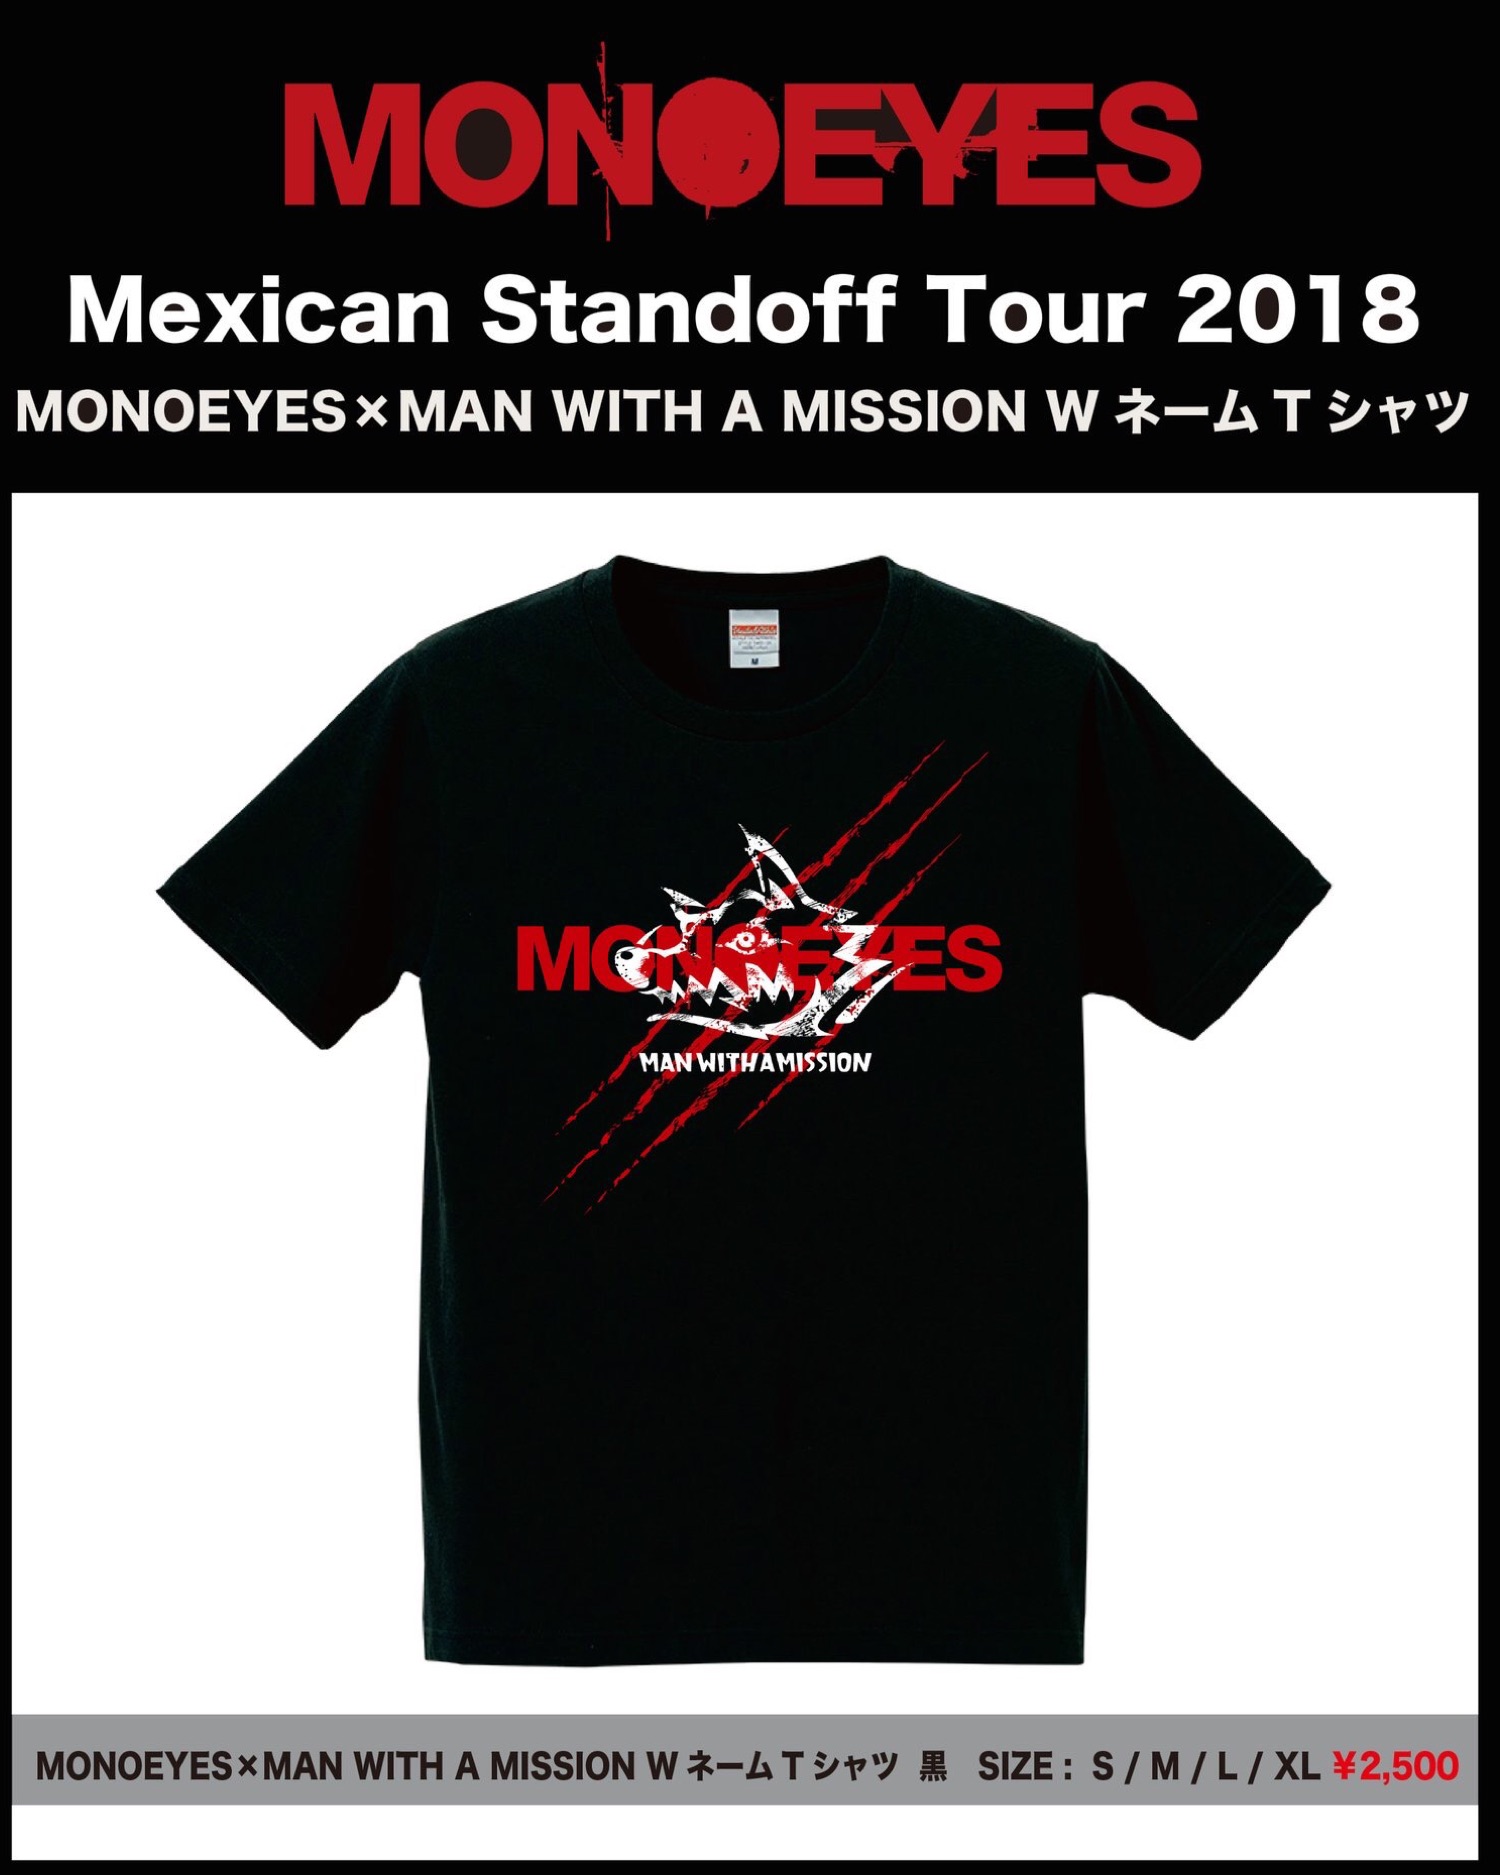 MONOEYES MAN WITH A MISSION コラボTシャツ細美武士 - bader.org.tr